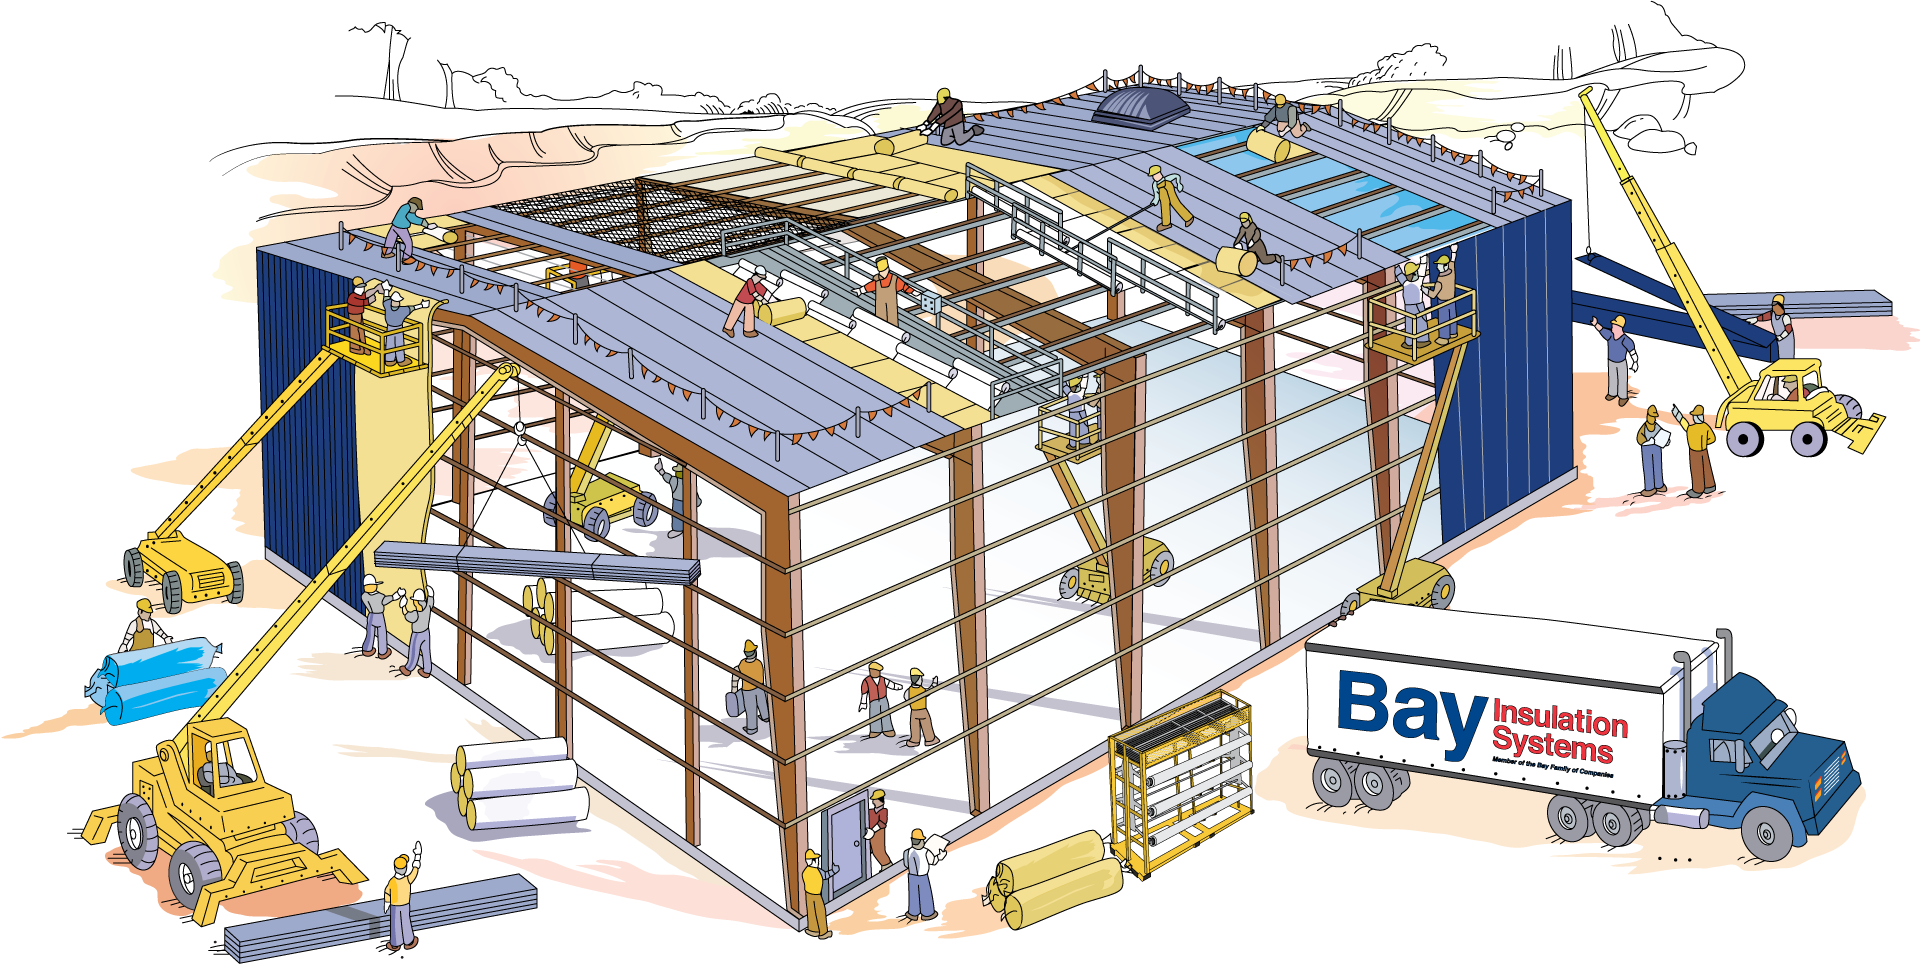 Metal building illustration showing the various insulation systems